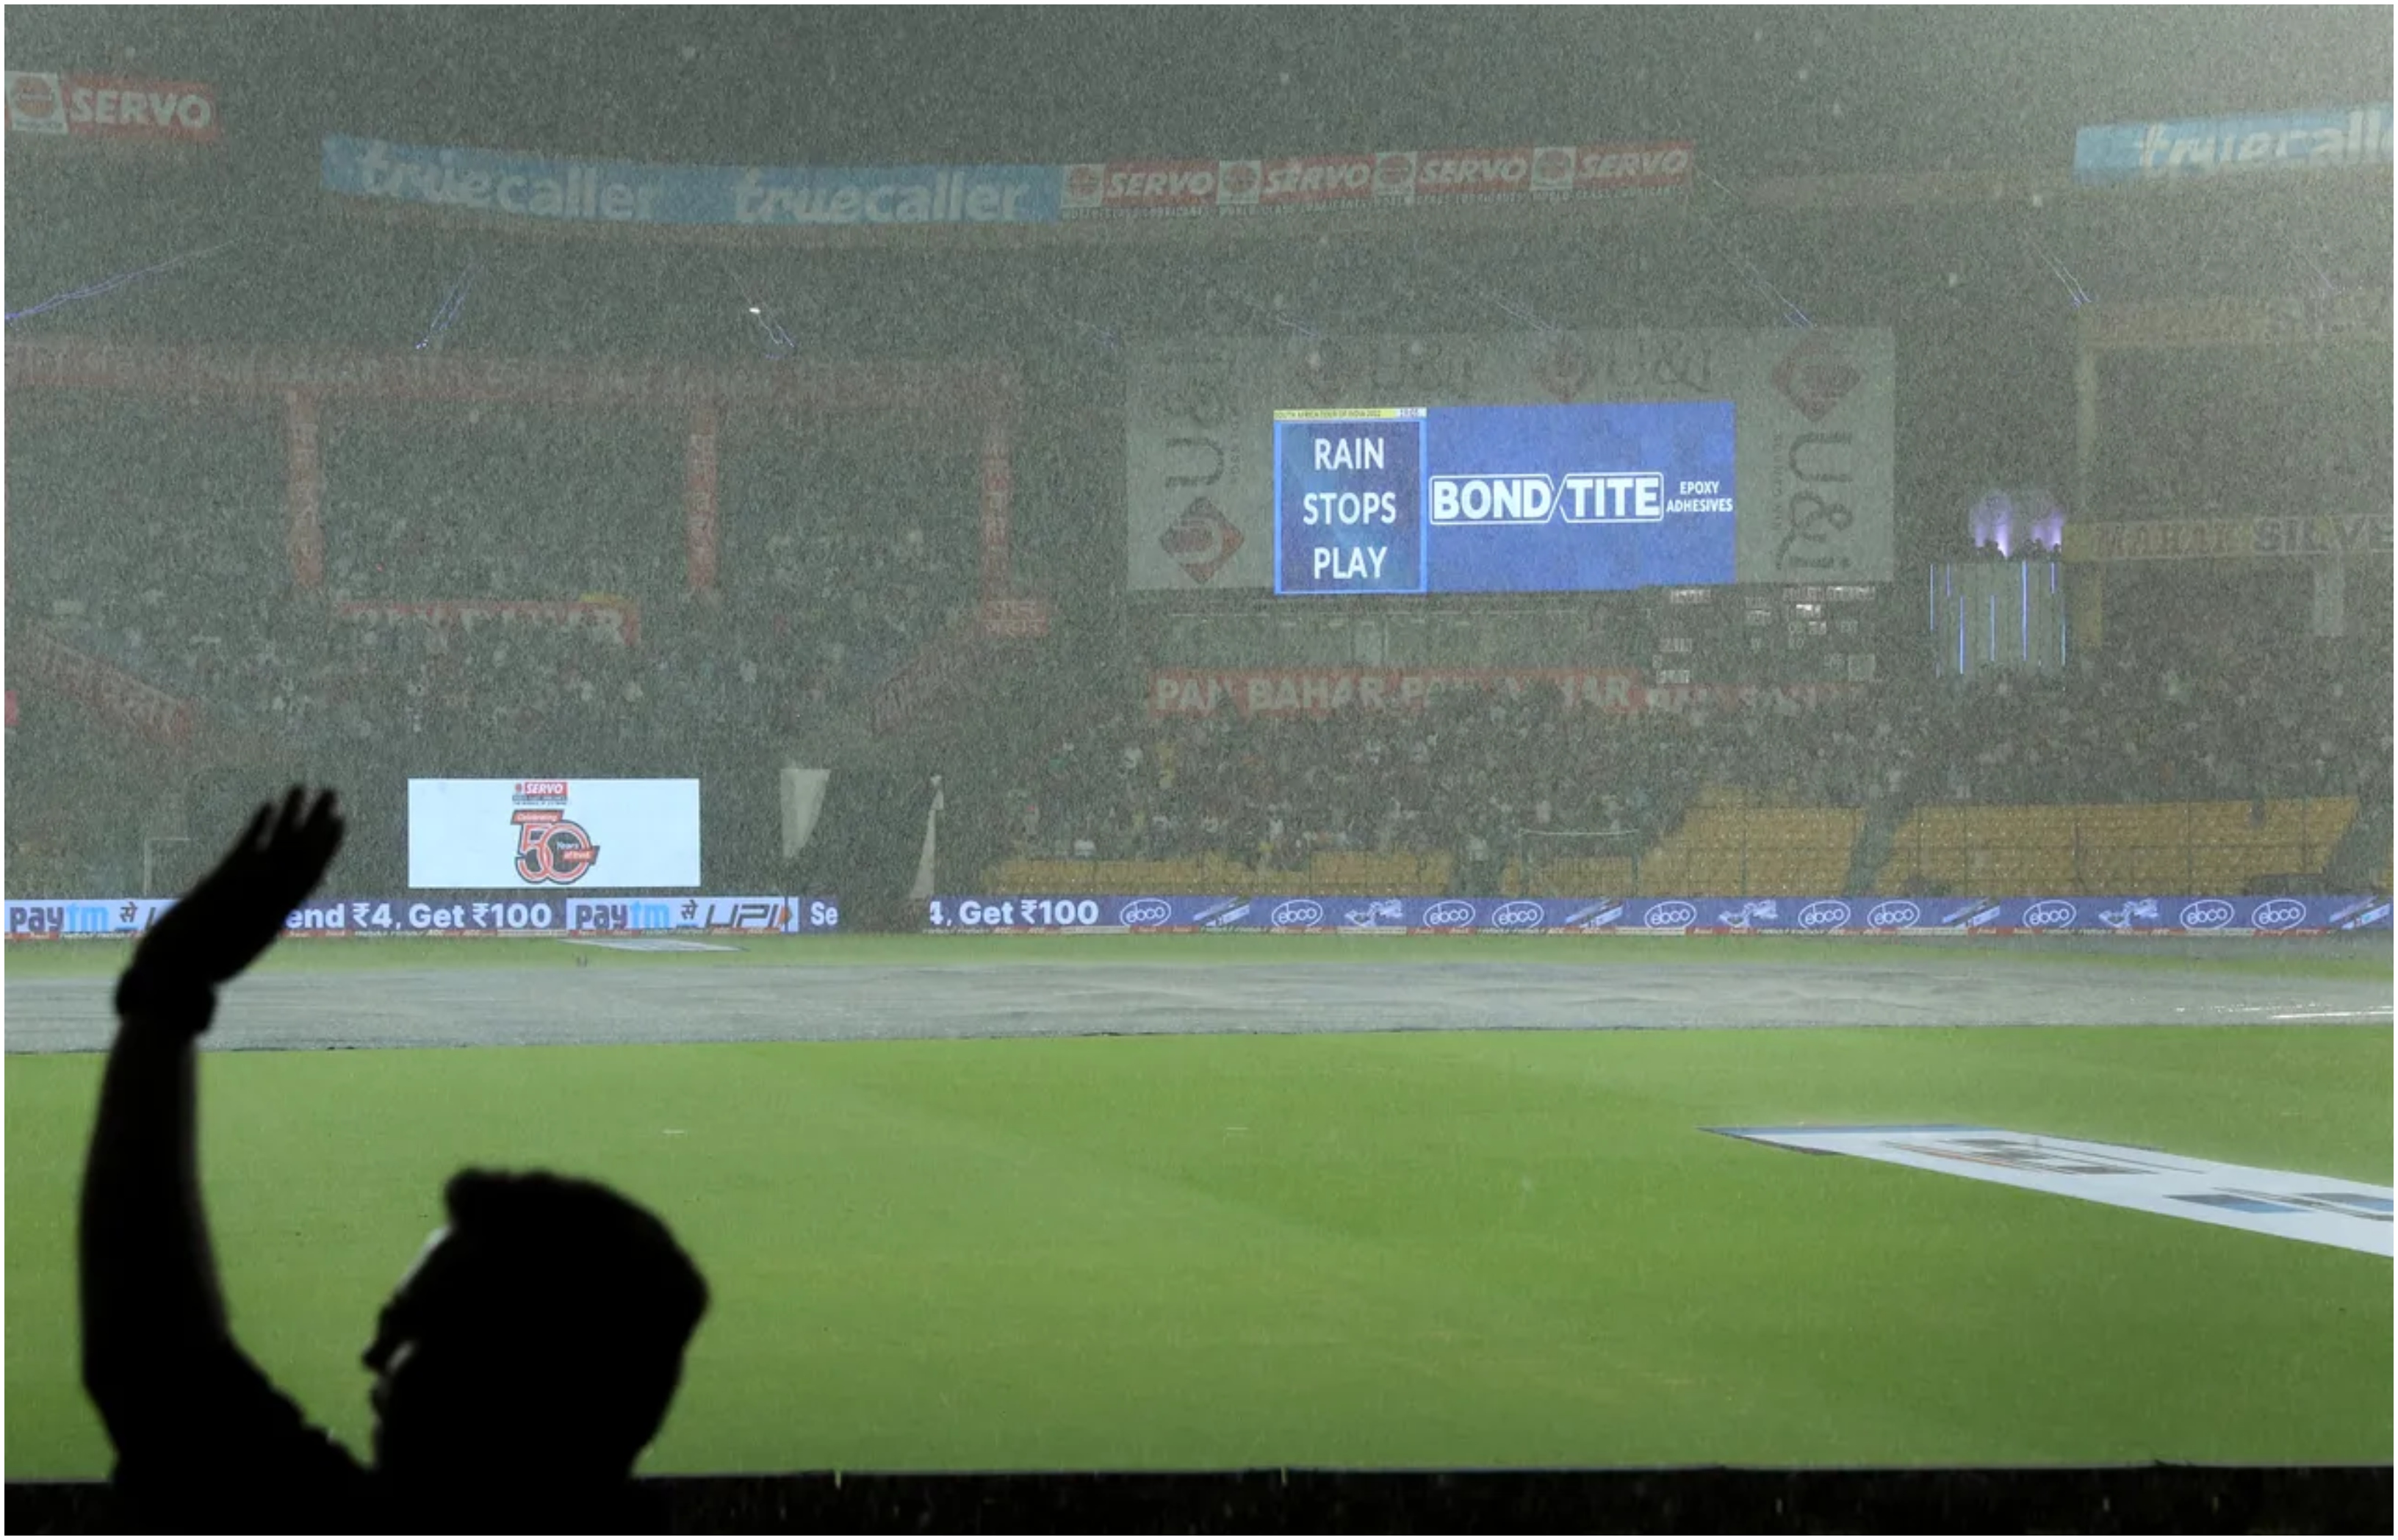 The fifth T20I was abandoned due to rain | BCCI